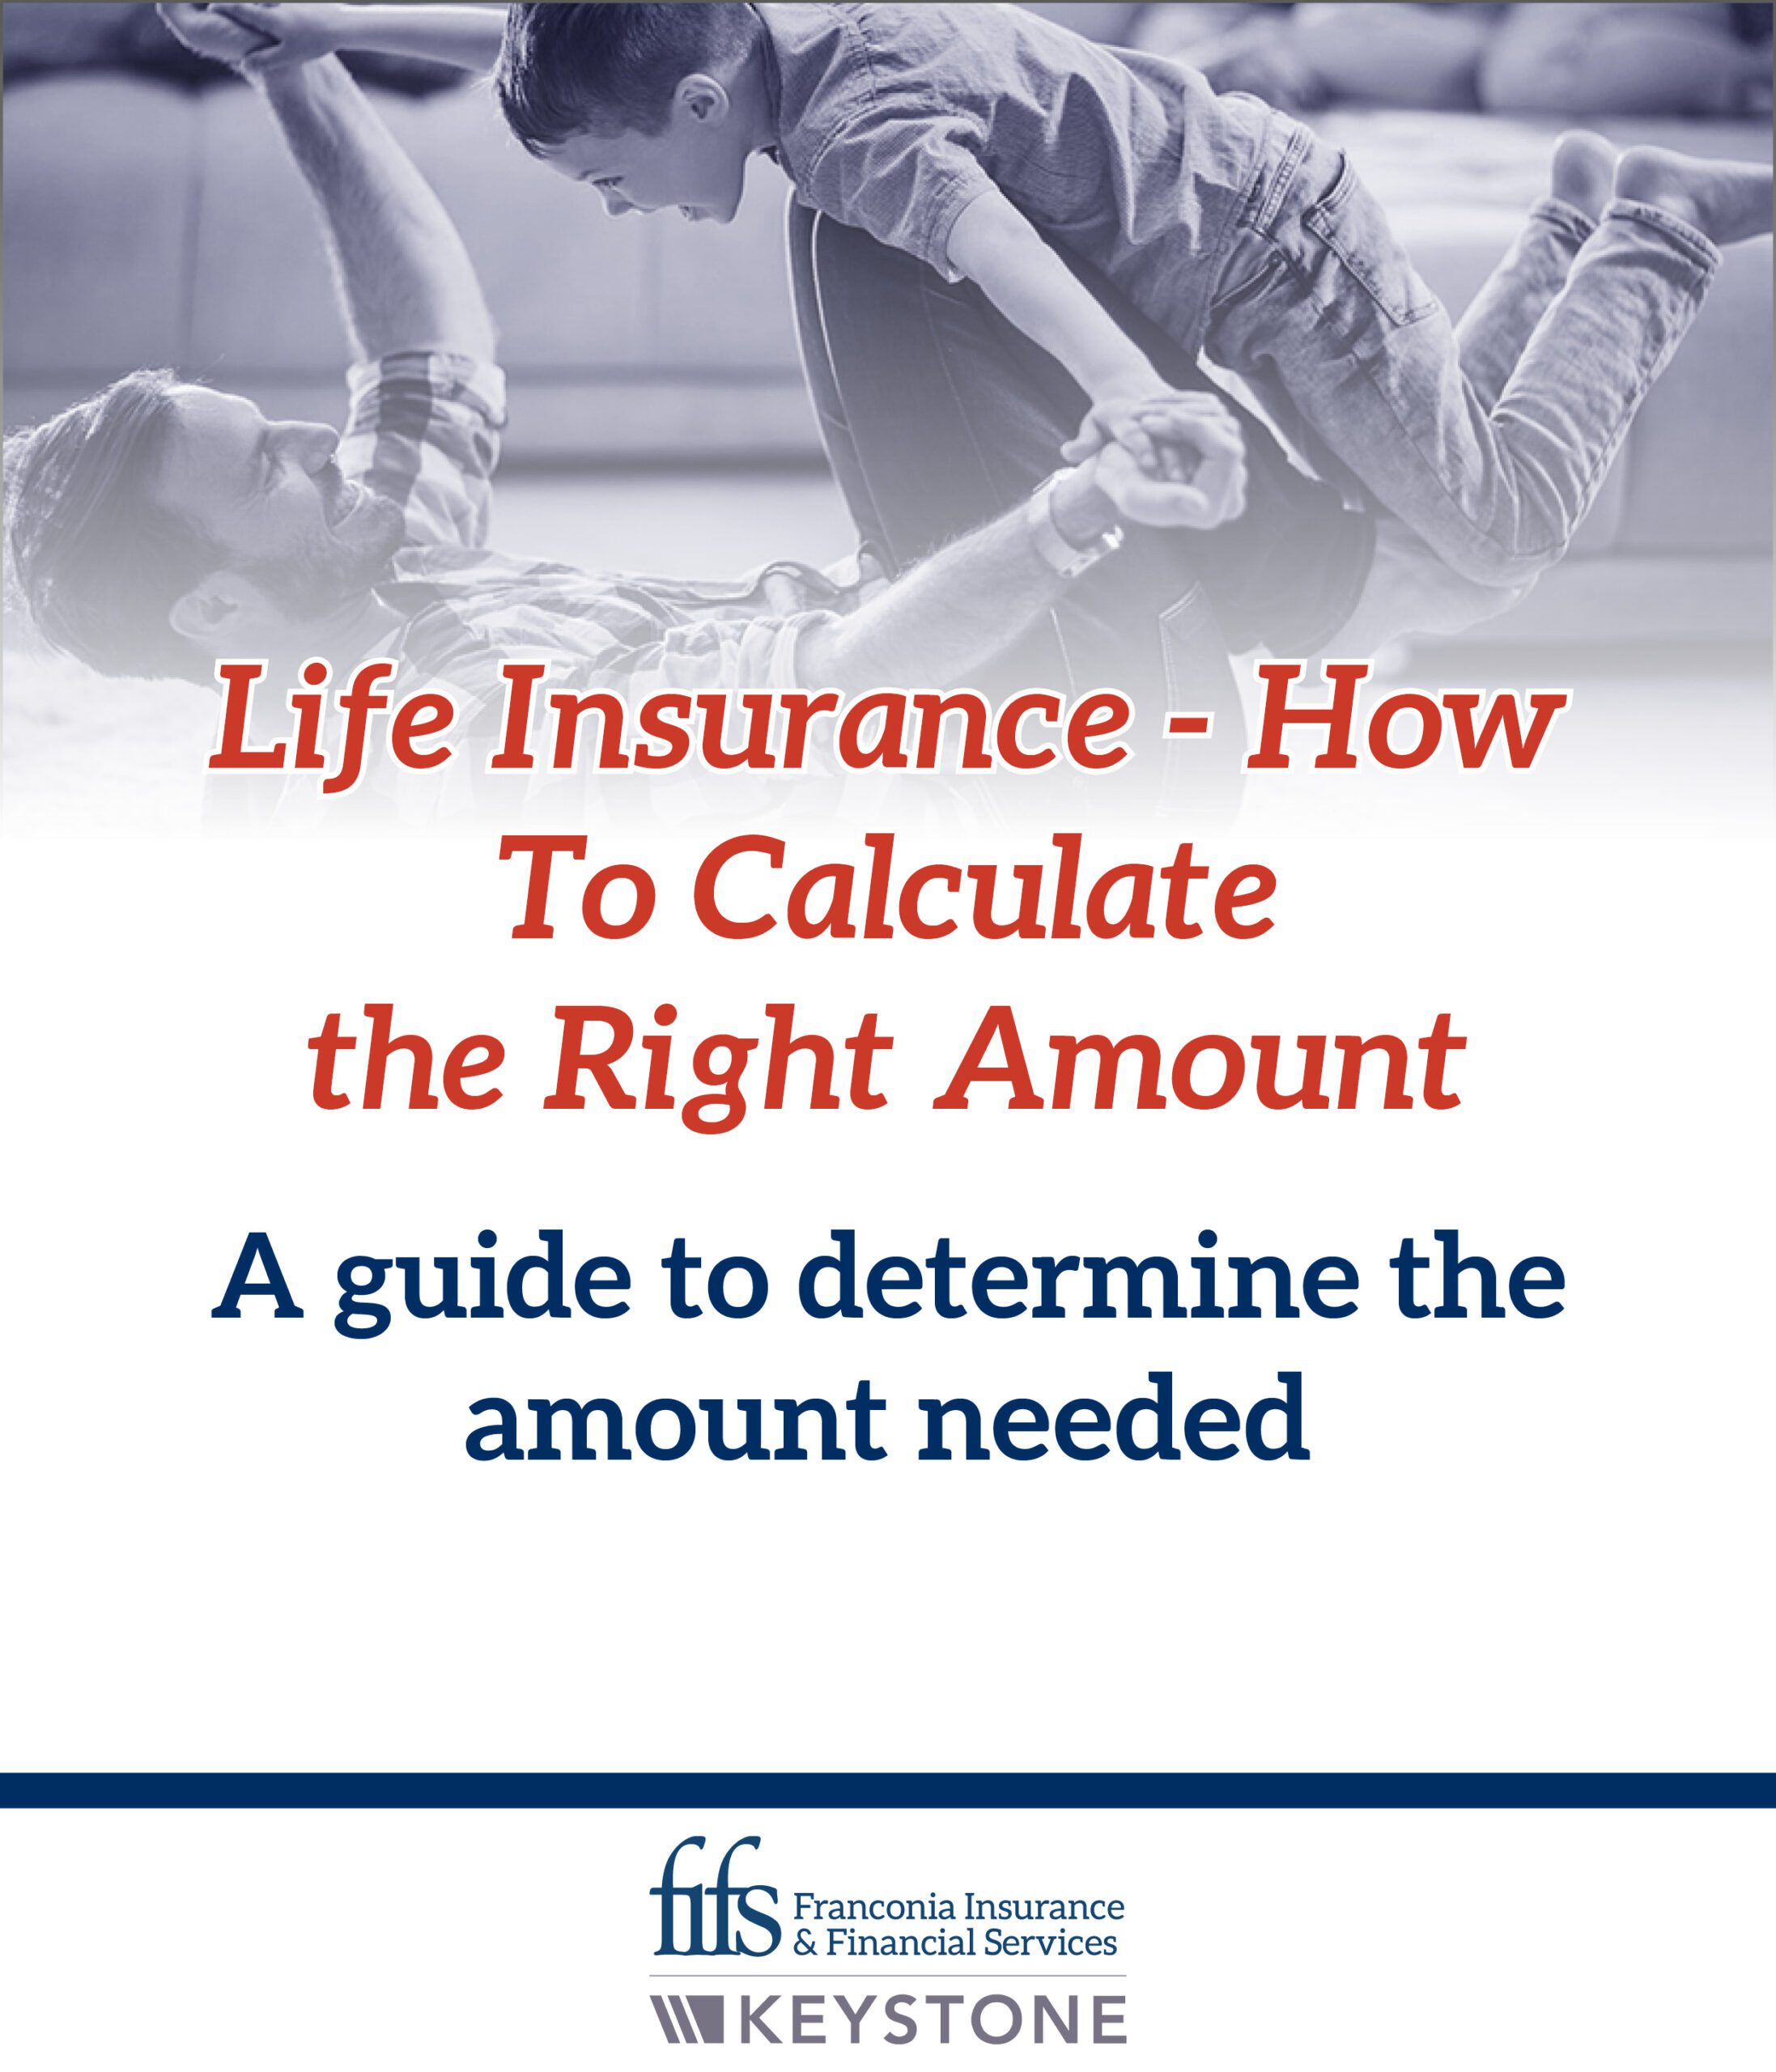 Life Insurance How to Calculate the Right Amount